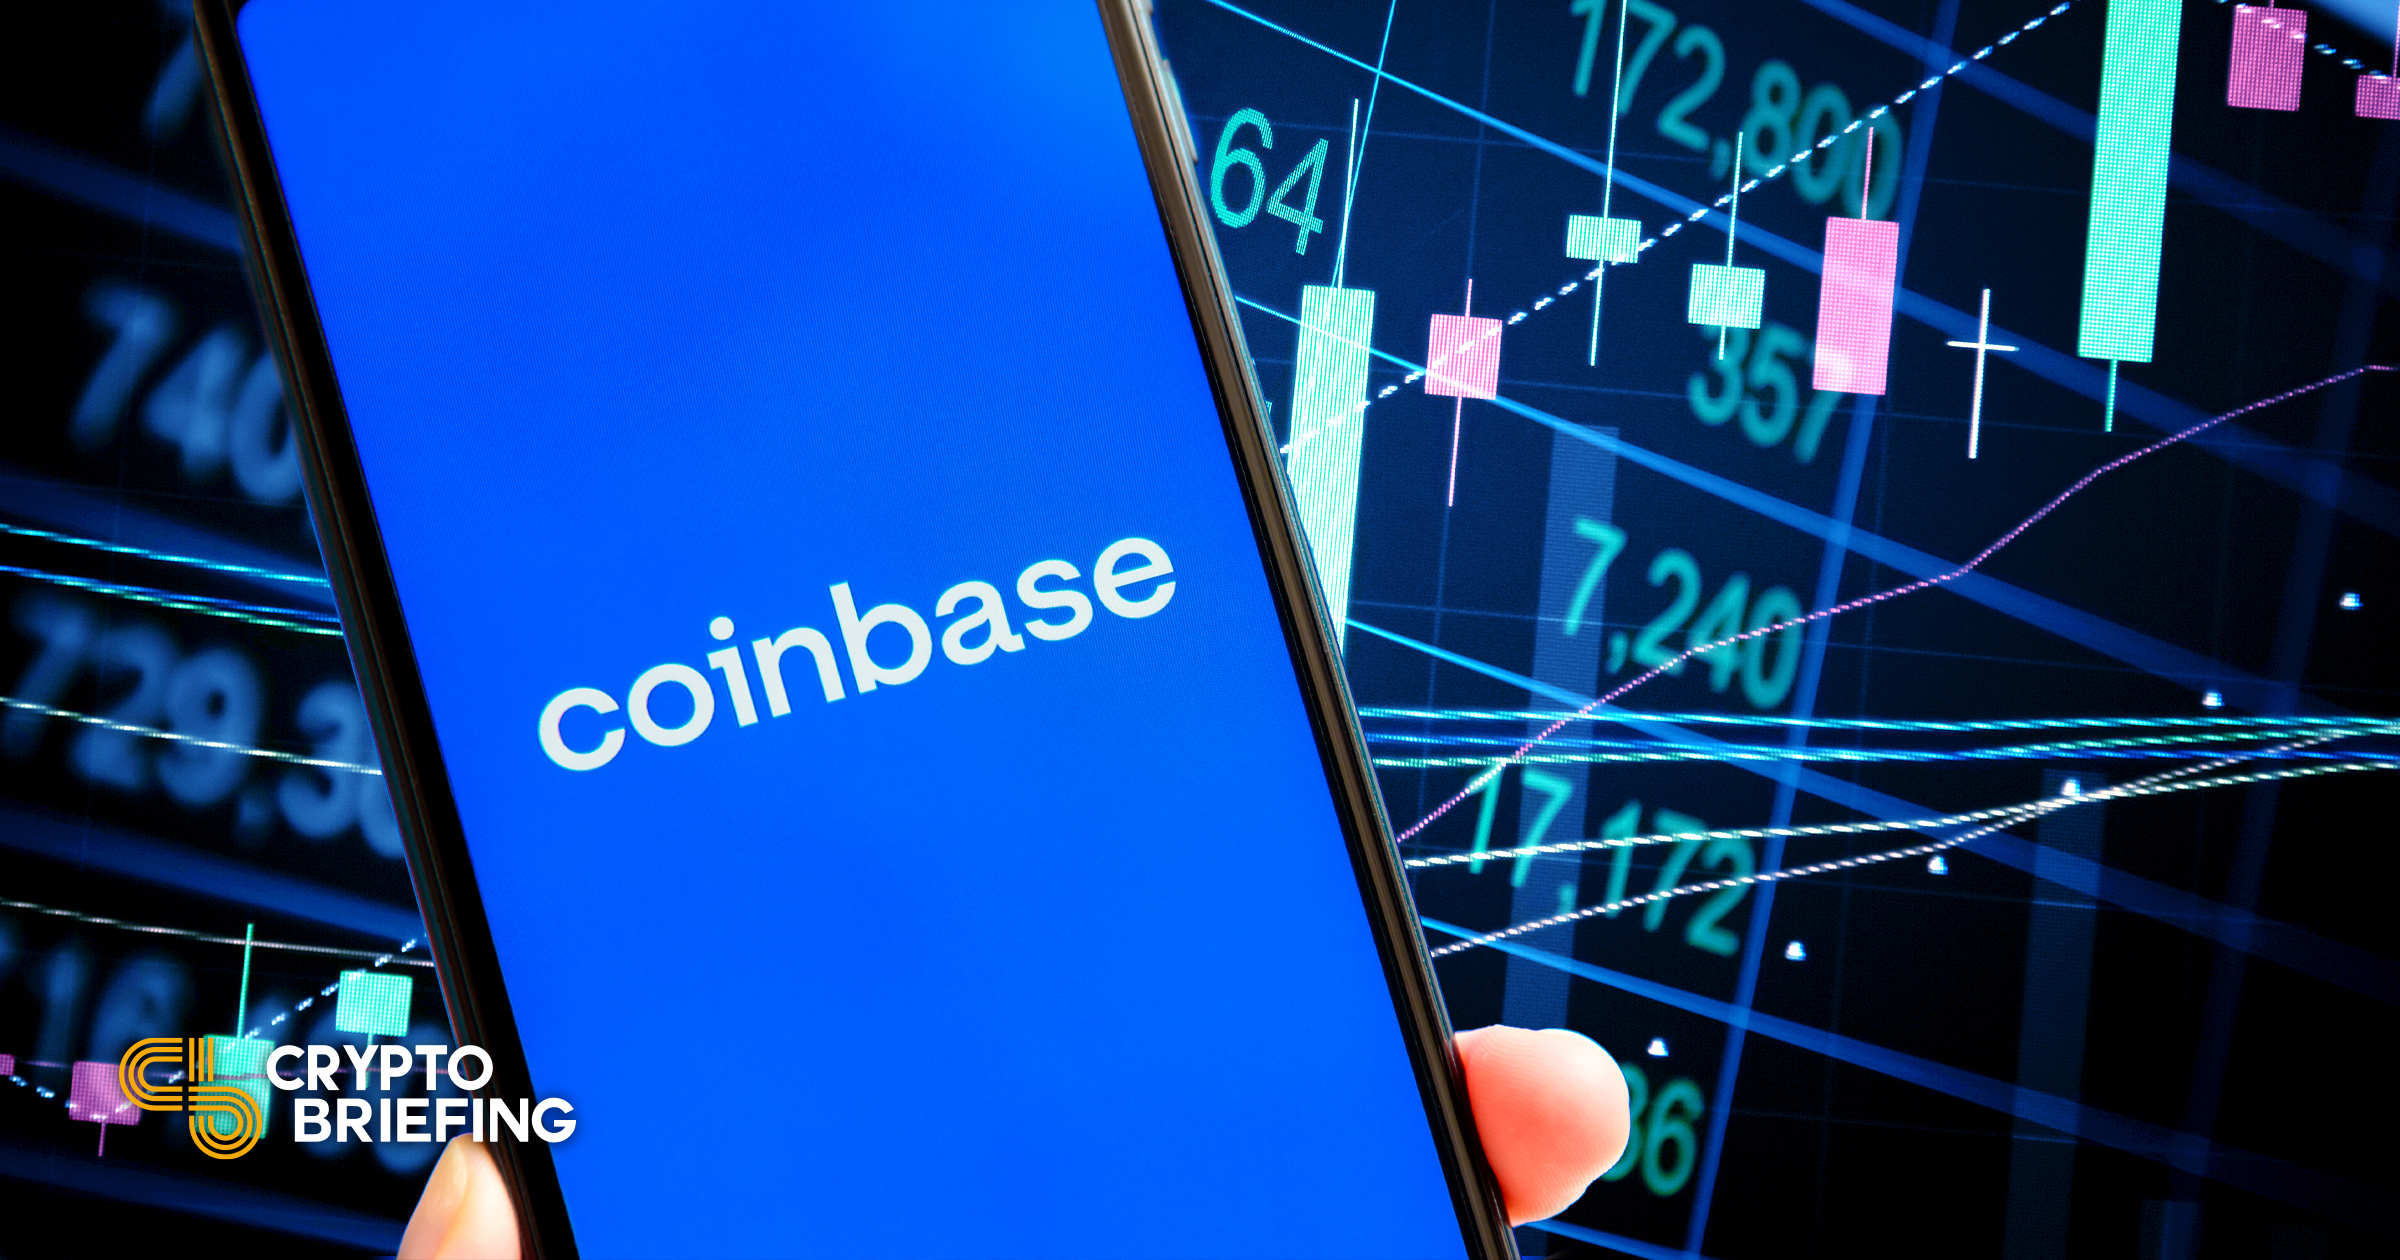 Coinbase Swings to Loss in Q3 as Trading Volume Plunges